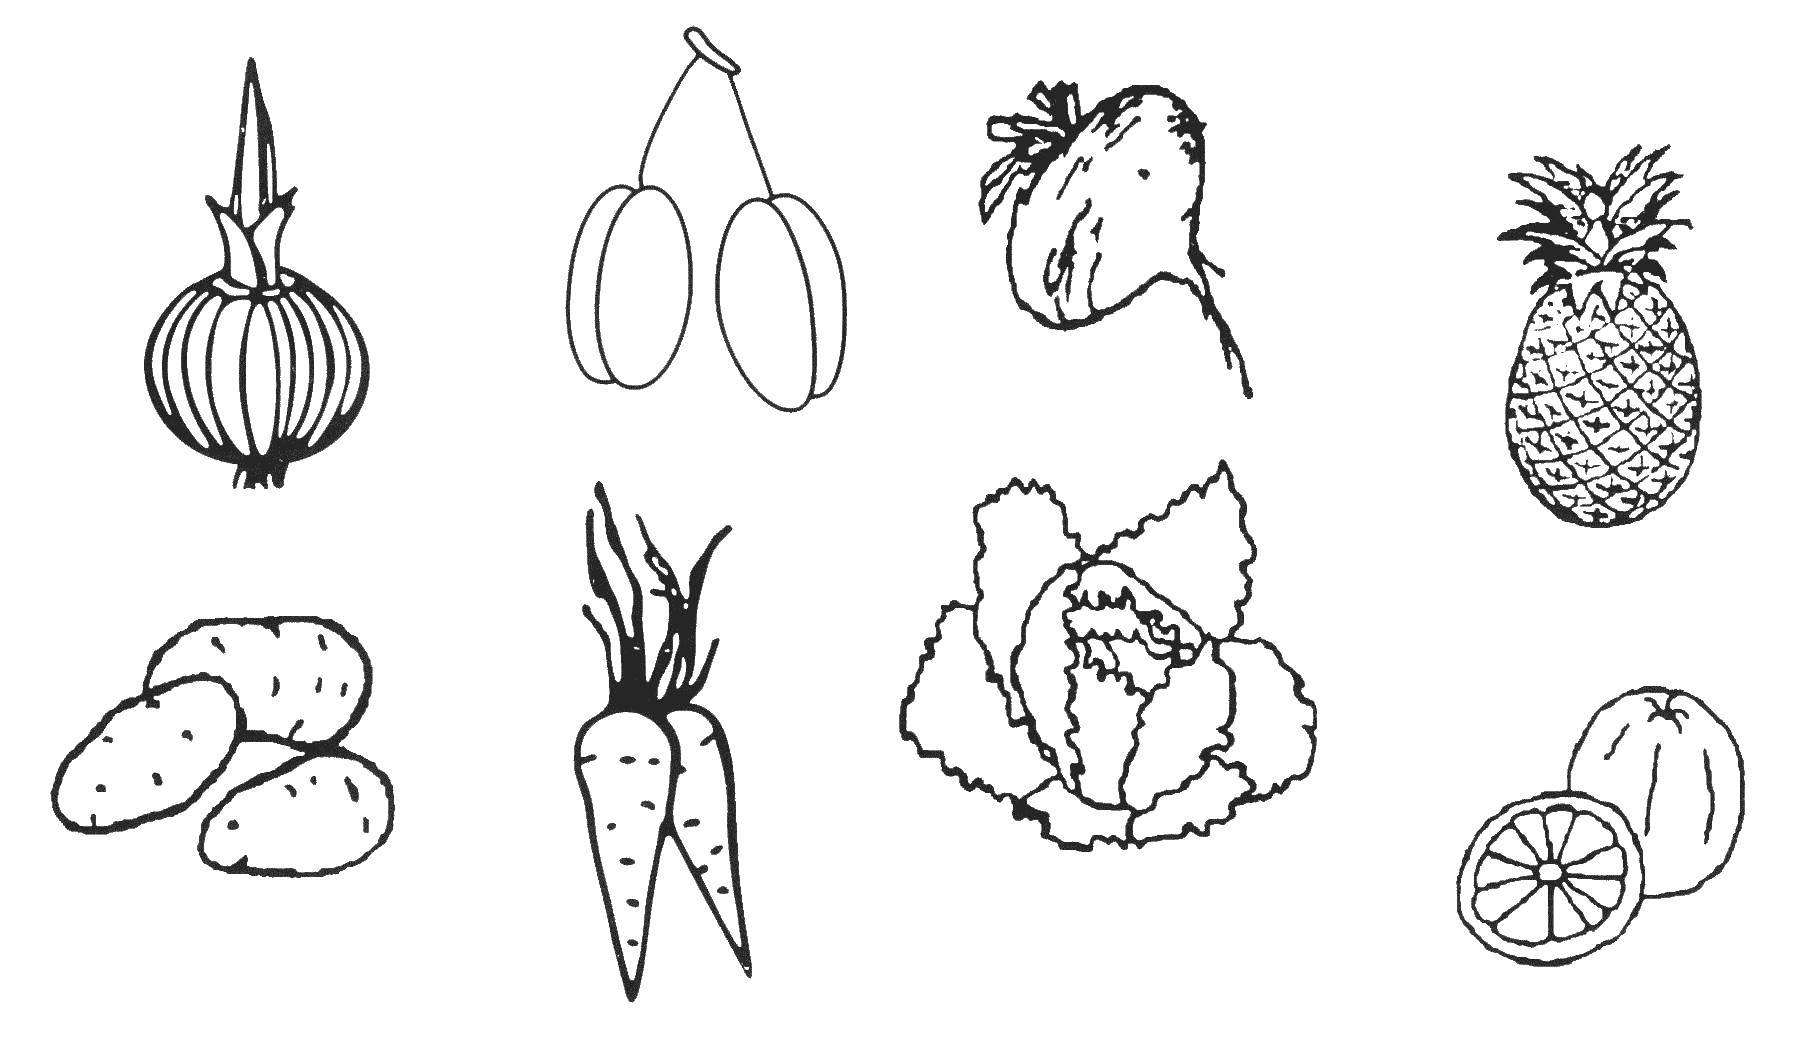 Coloring Fruits and vegetables. Category fruits. Tags:  fruits, vegetables.